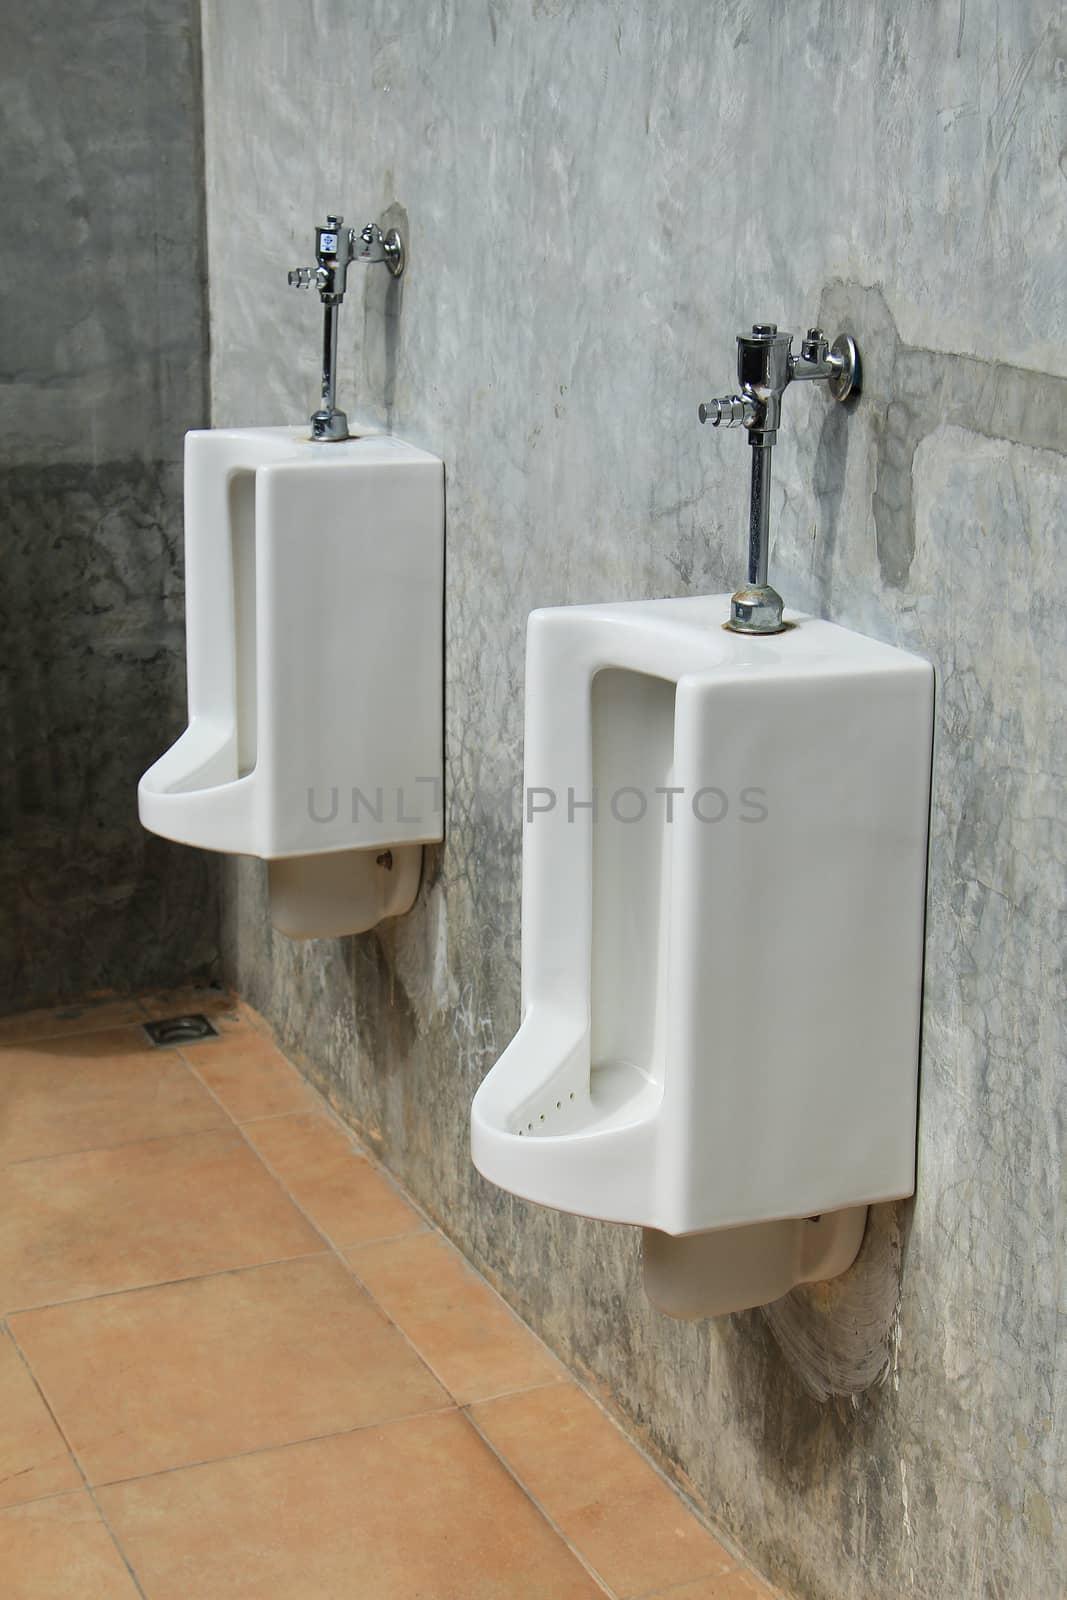 Urinals in a public restroom by foto76